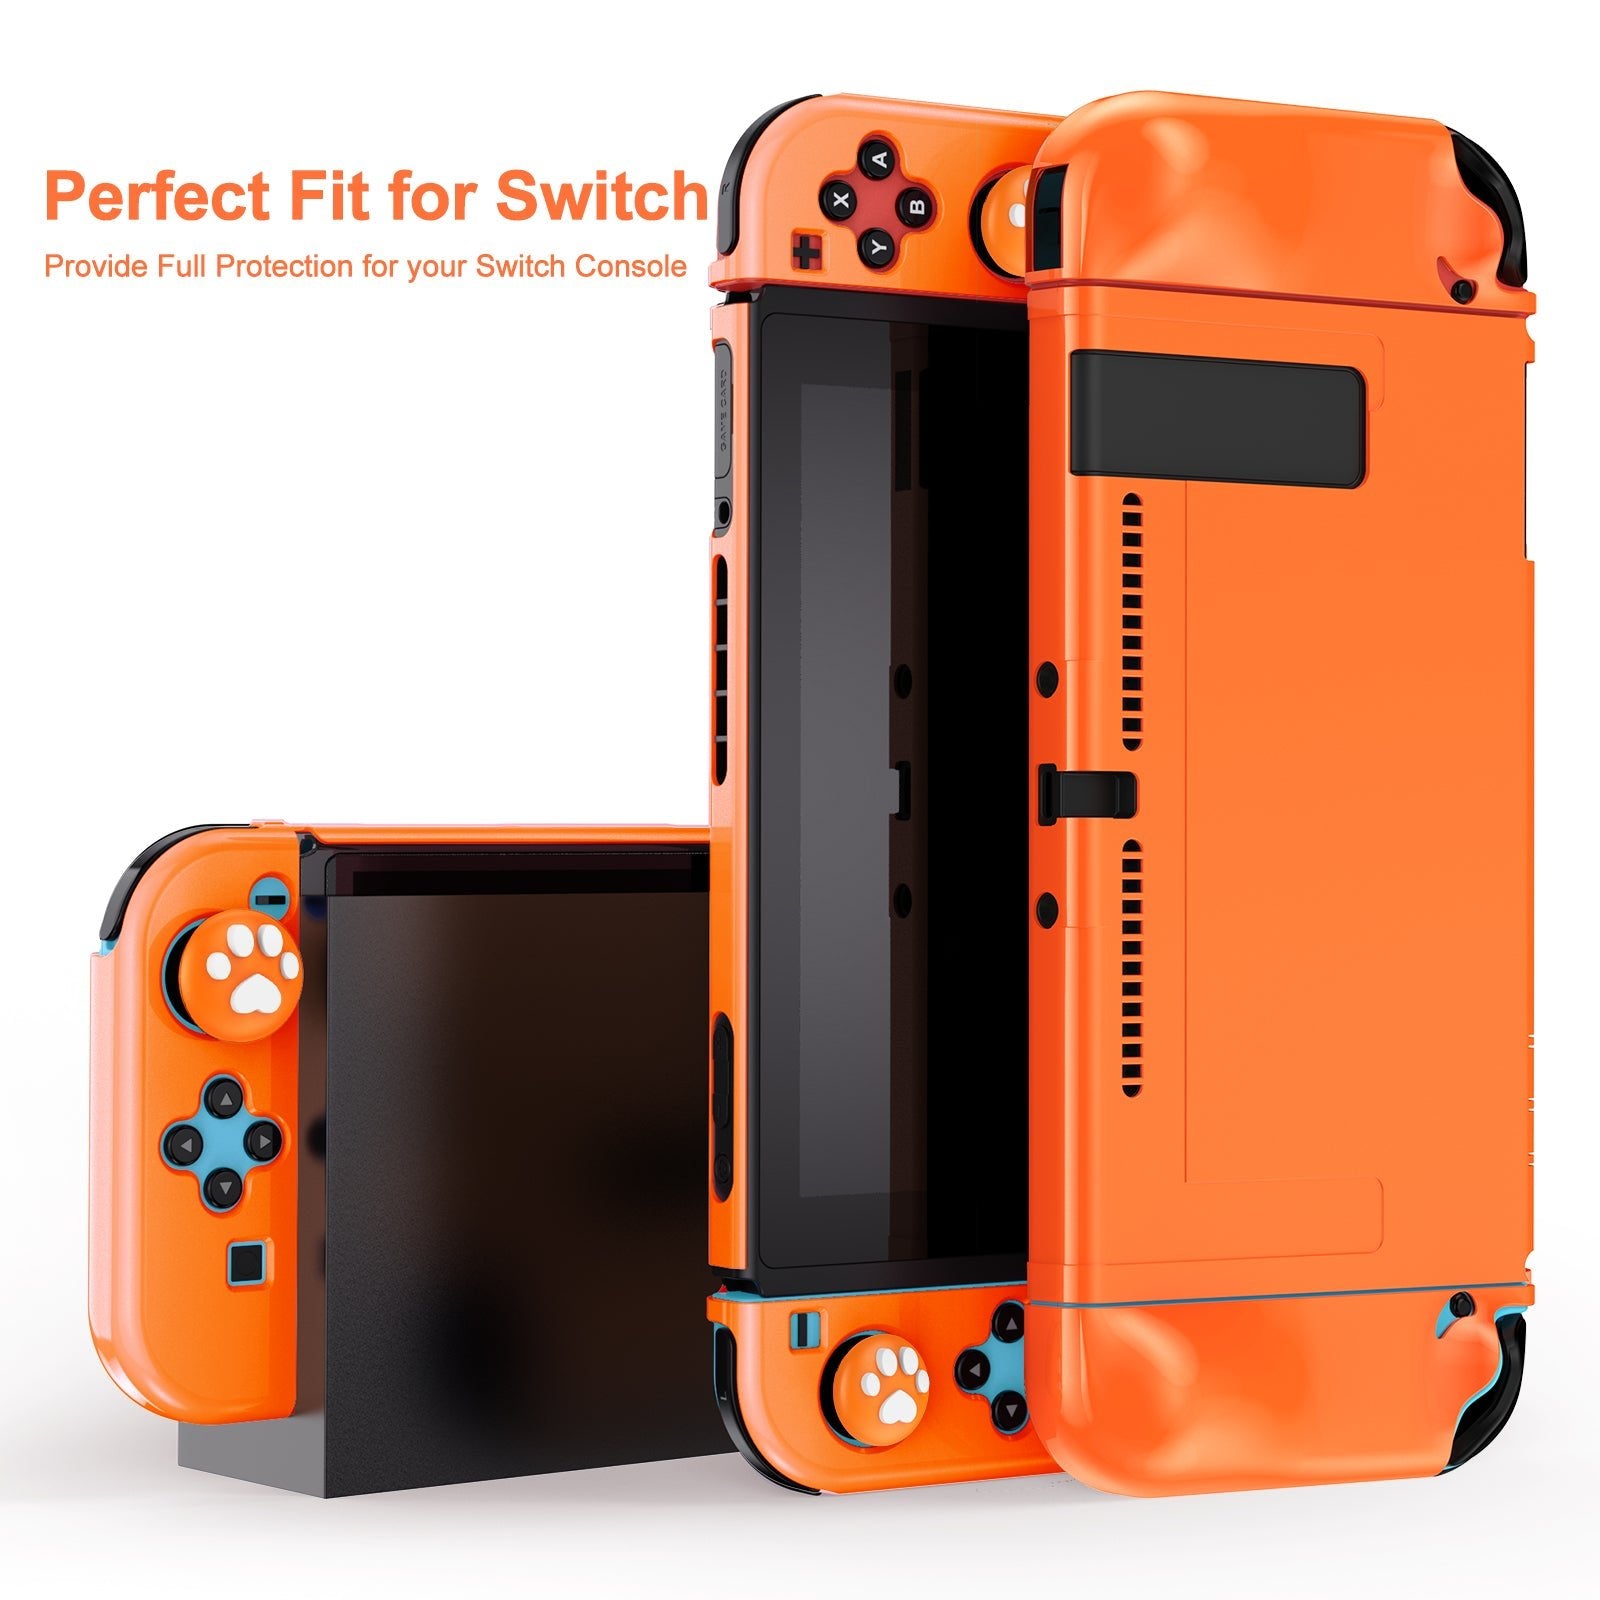 Younik Hard Switch Carrying Case, Thumb Grips for Nintendo Switch